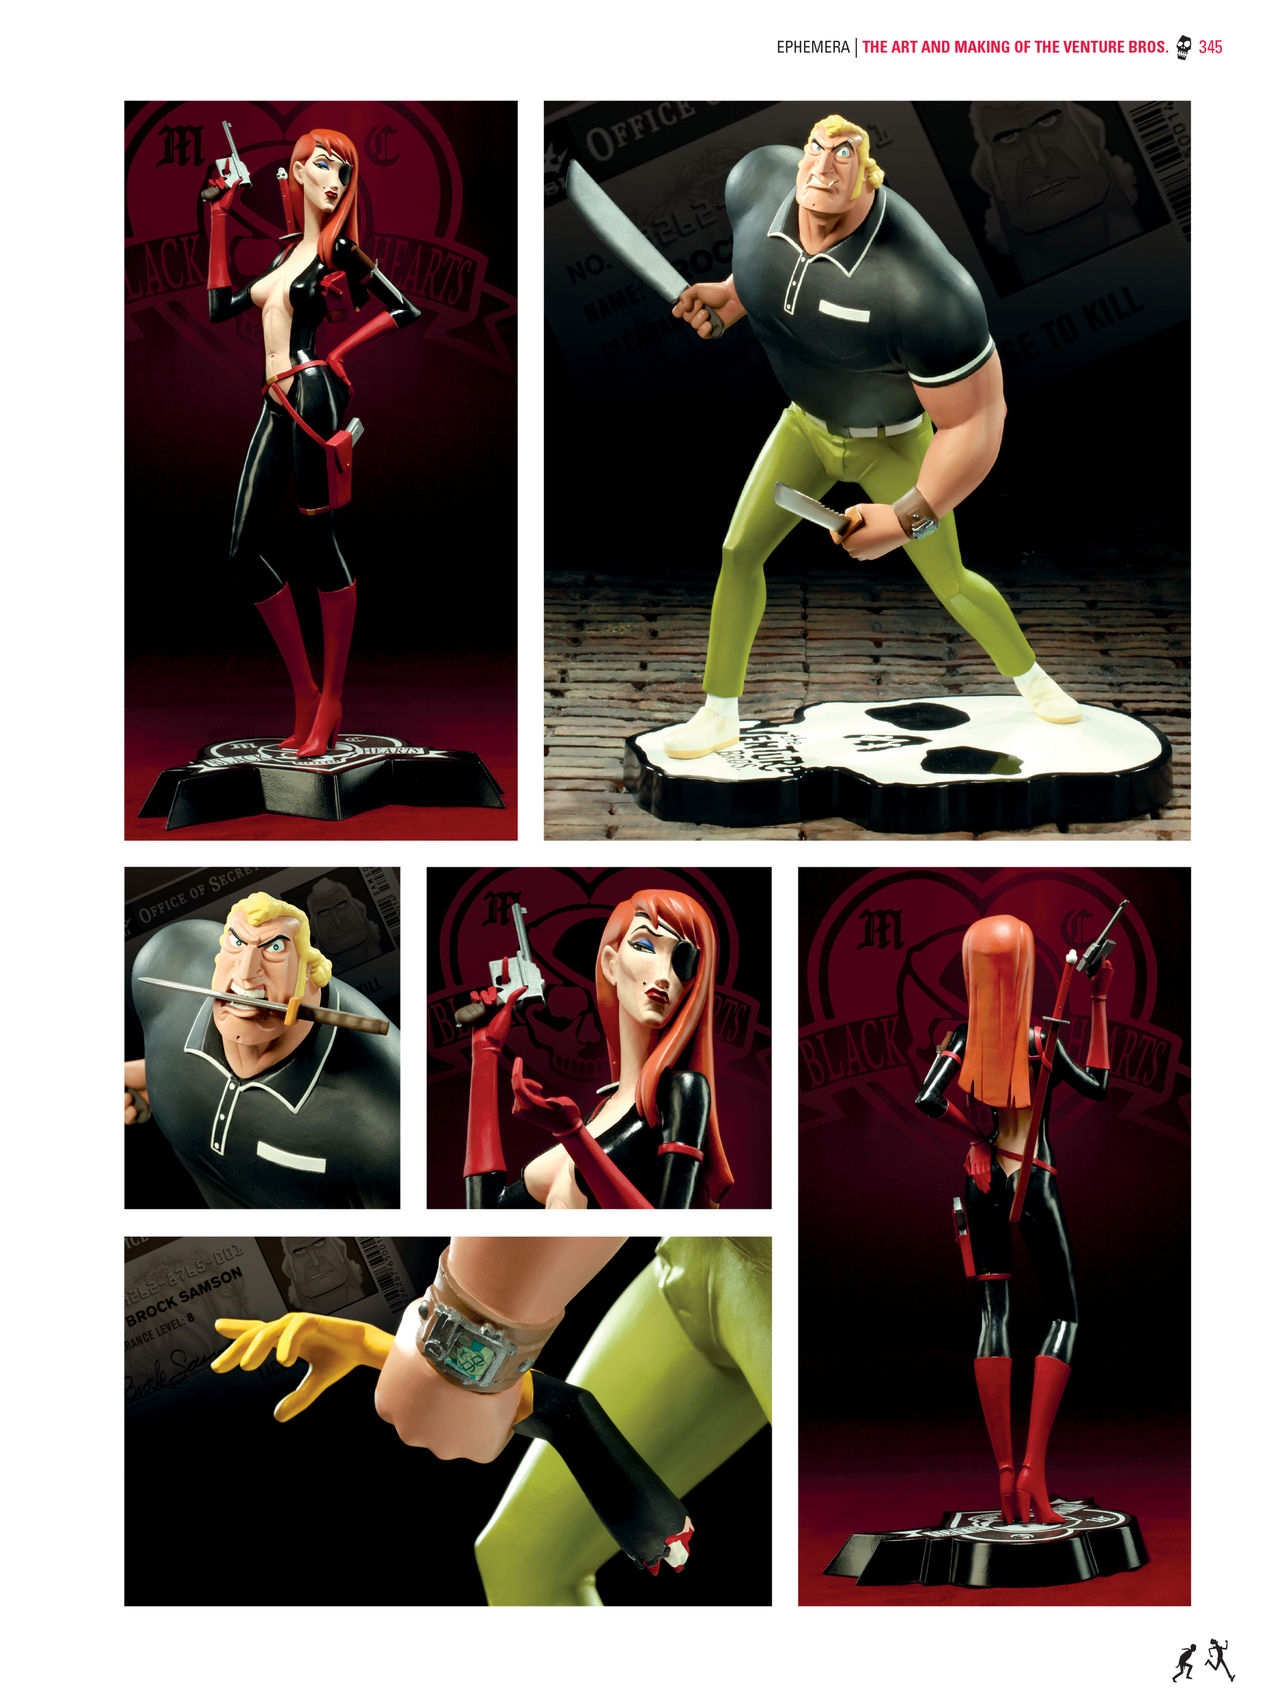 Go Team Venture! - The Art and Making of the Venture Bros 343